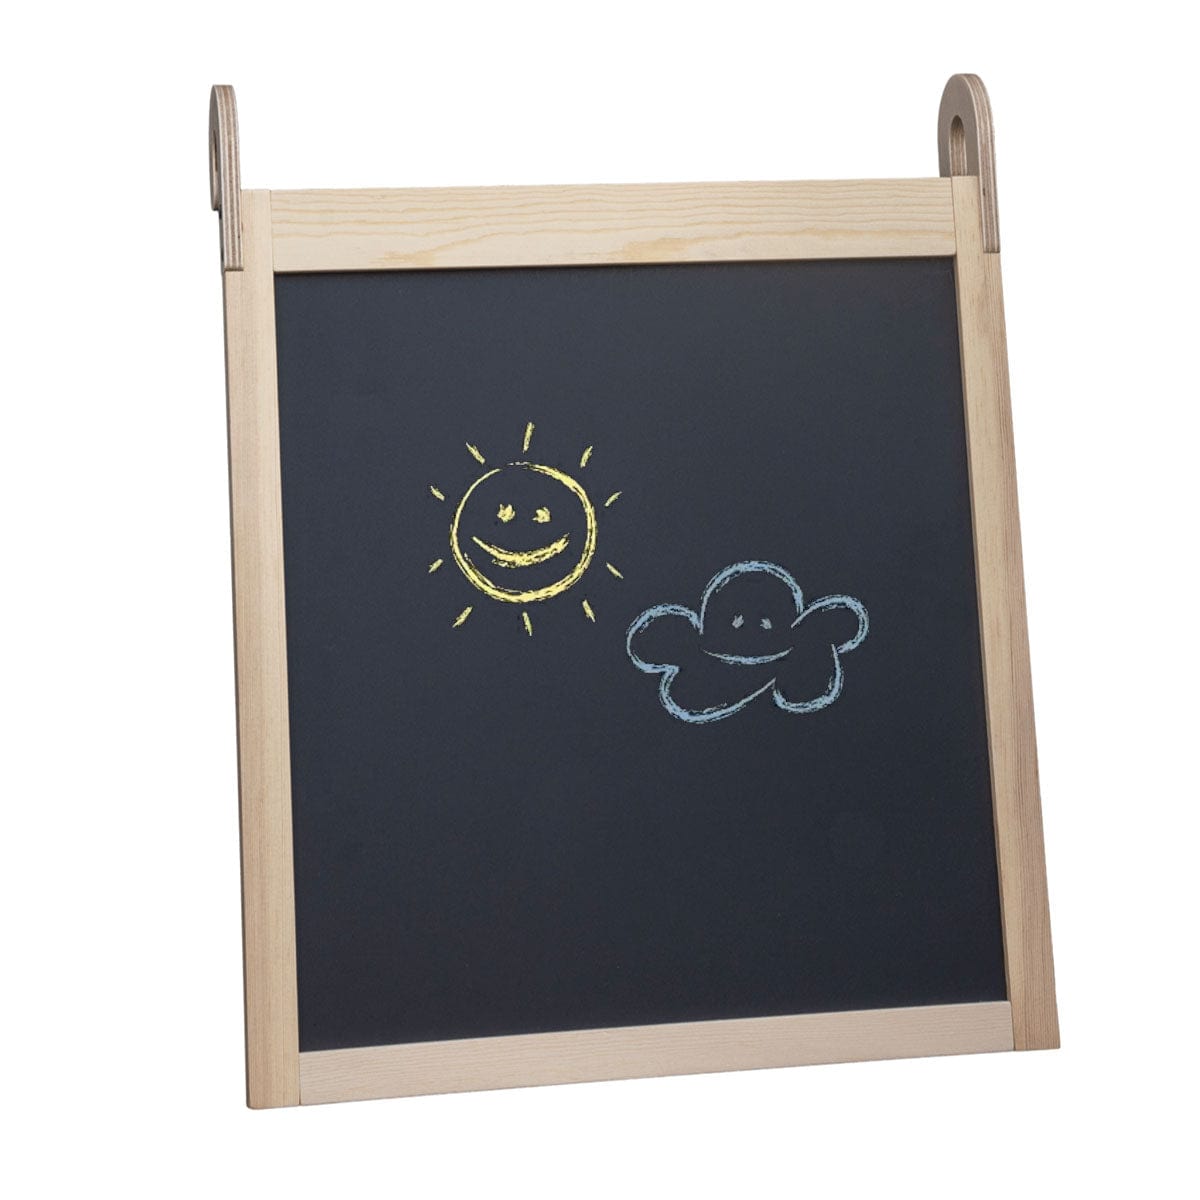 My Duckling JALA Deluxe Dual-Sided Magnetic Whiteboard and Chalkboard